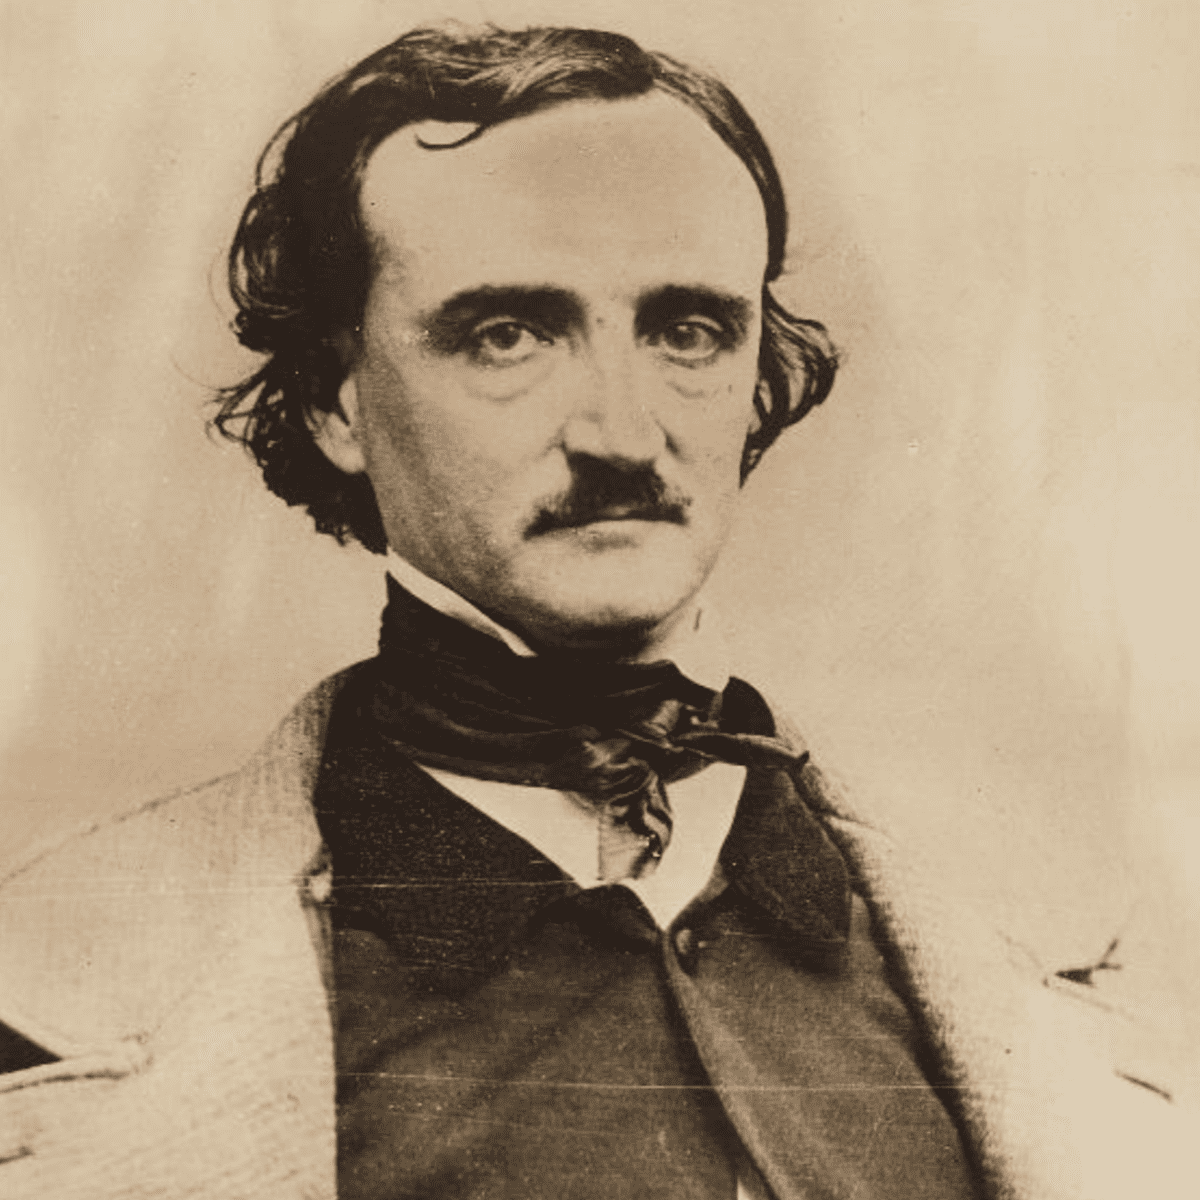 to helen by edgar allan poe meaning